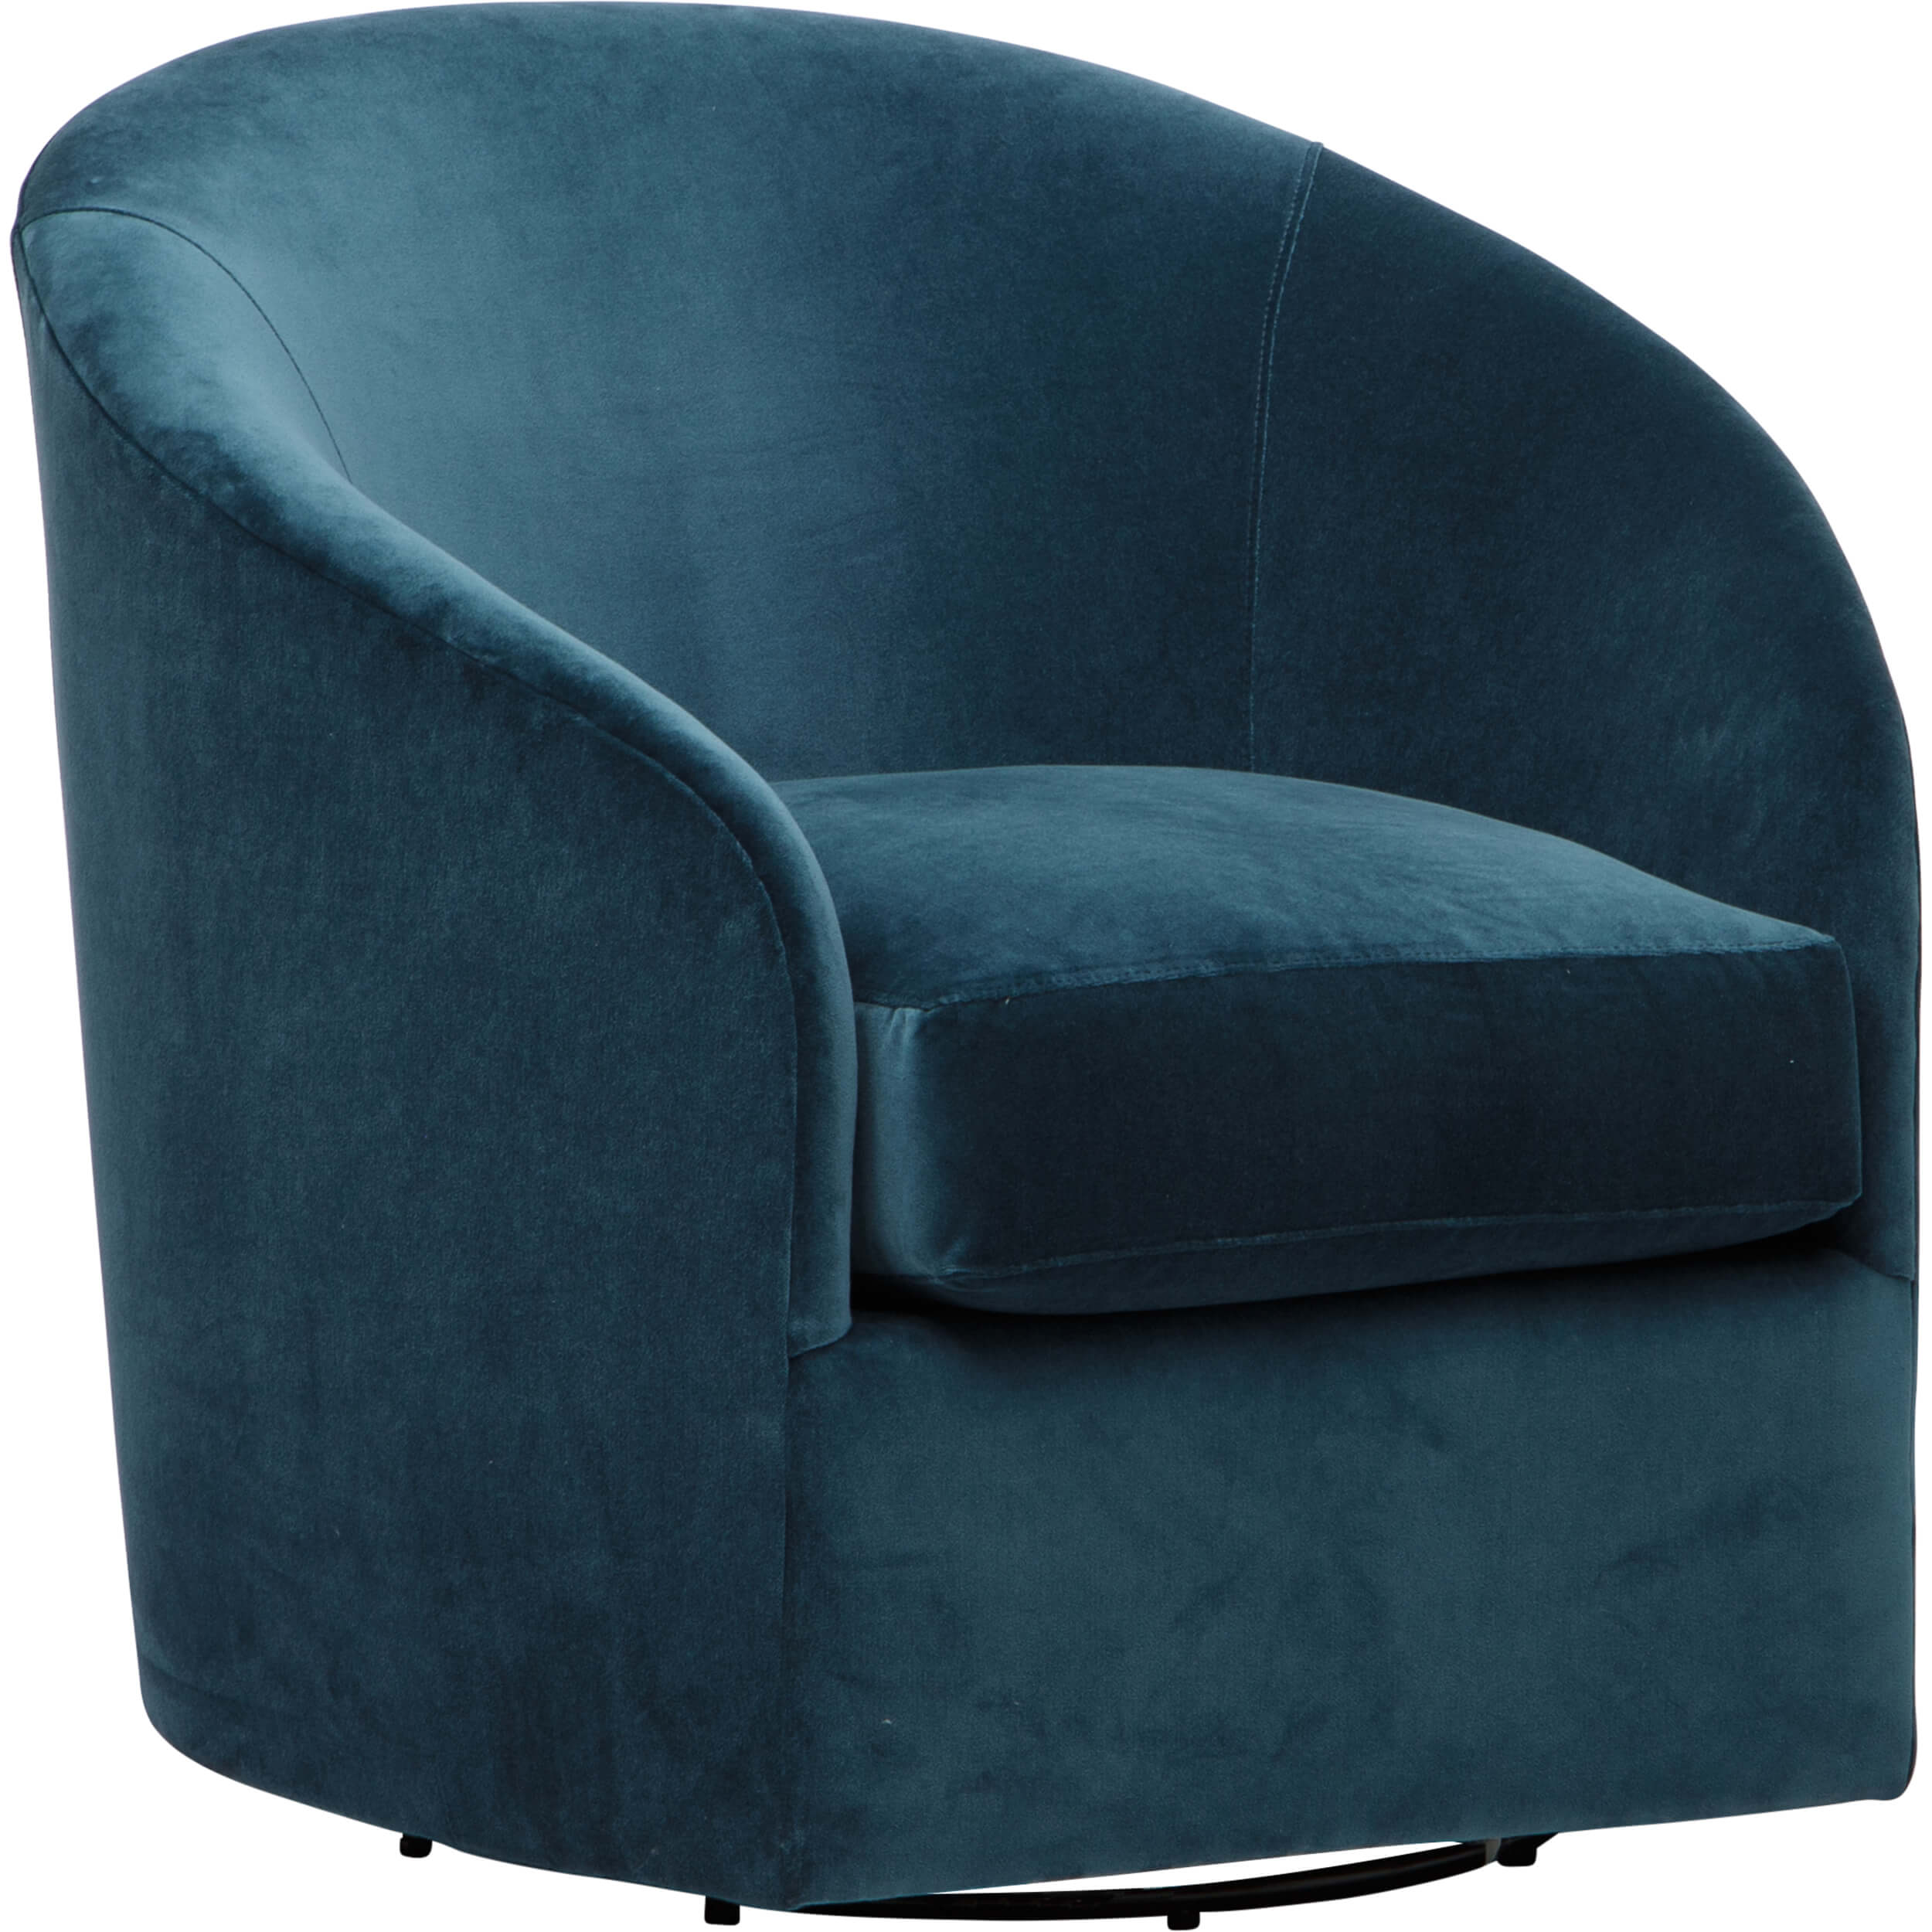 Image of Arlo Swivel Chair, Vance Dragonfly